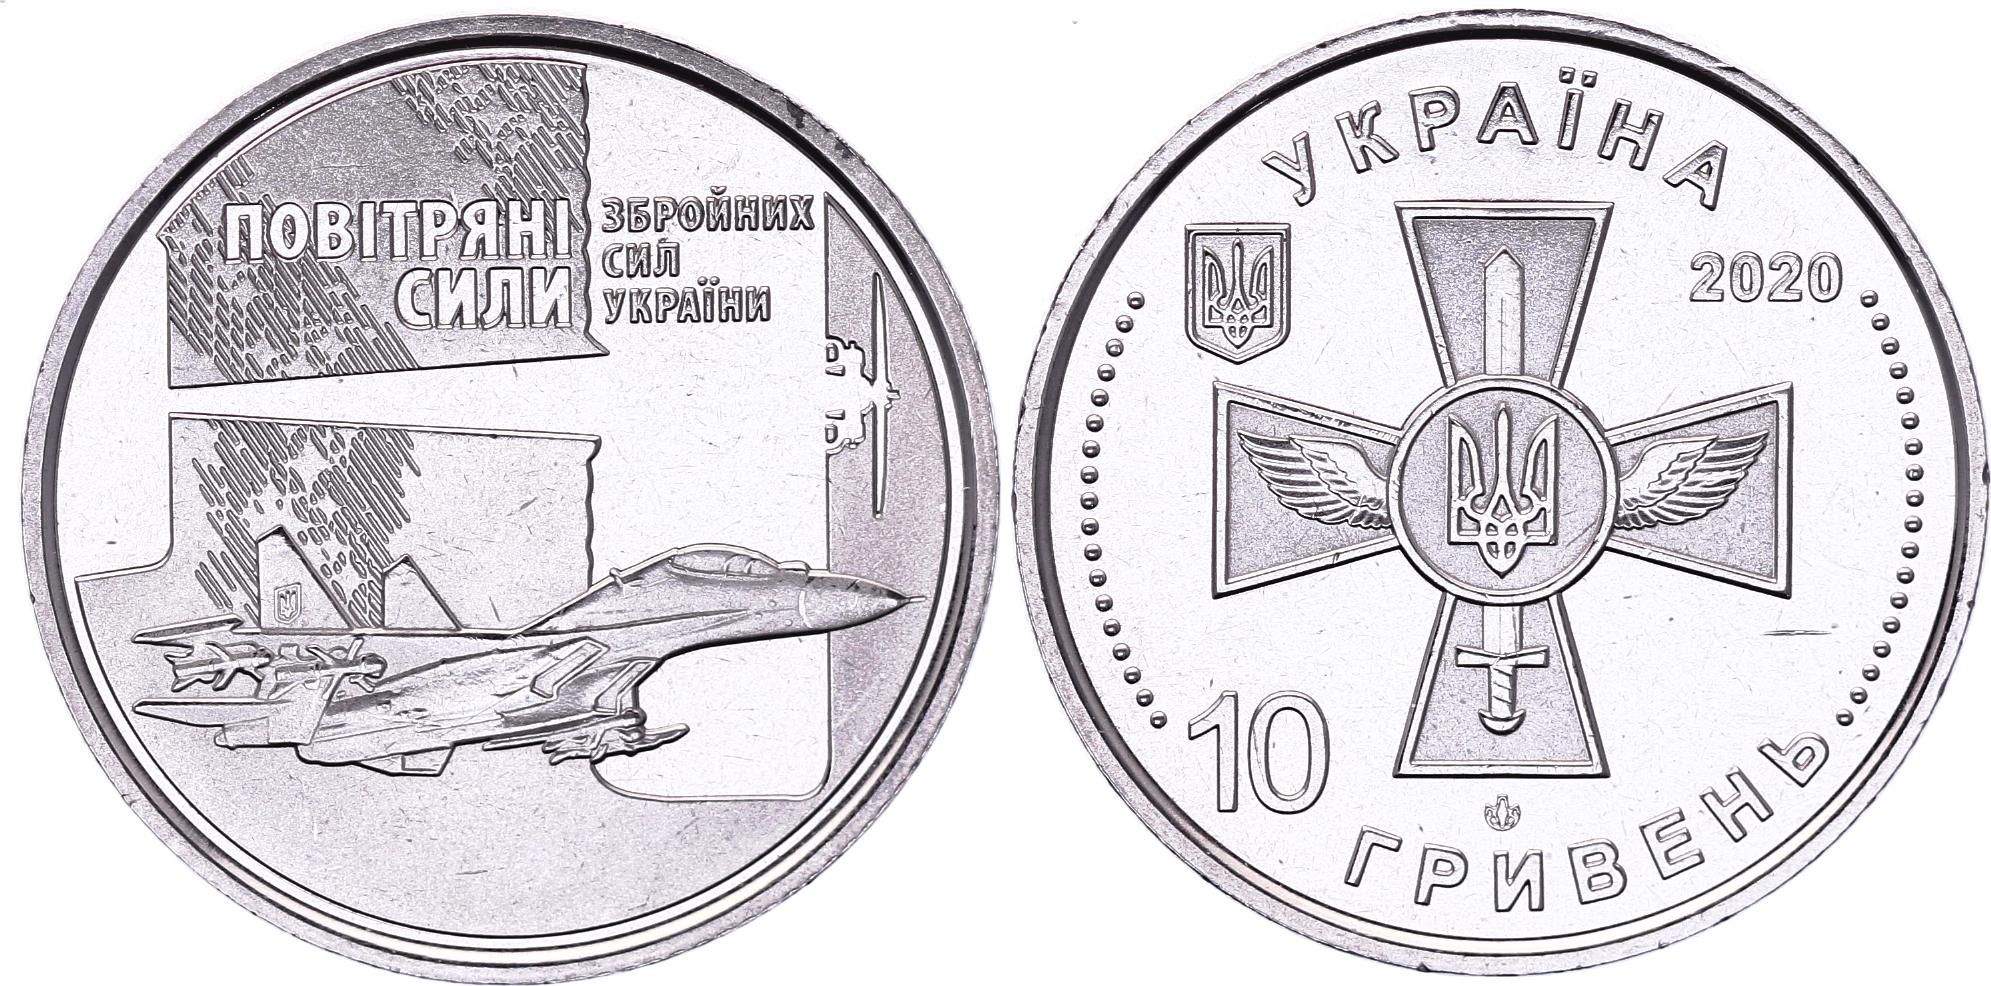 UC473 Ukraine Coin 10 Hryven 2020 Air Force of Ukraine’s Armed Forces in capsule